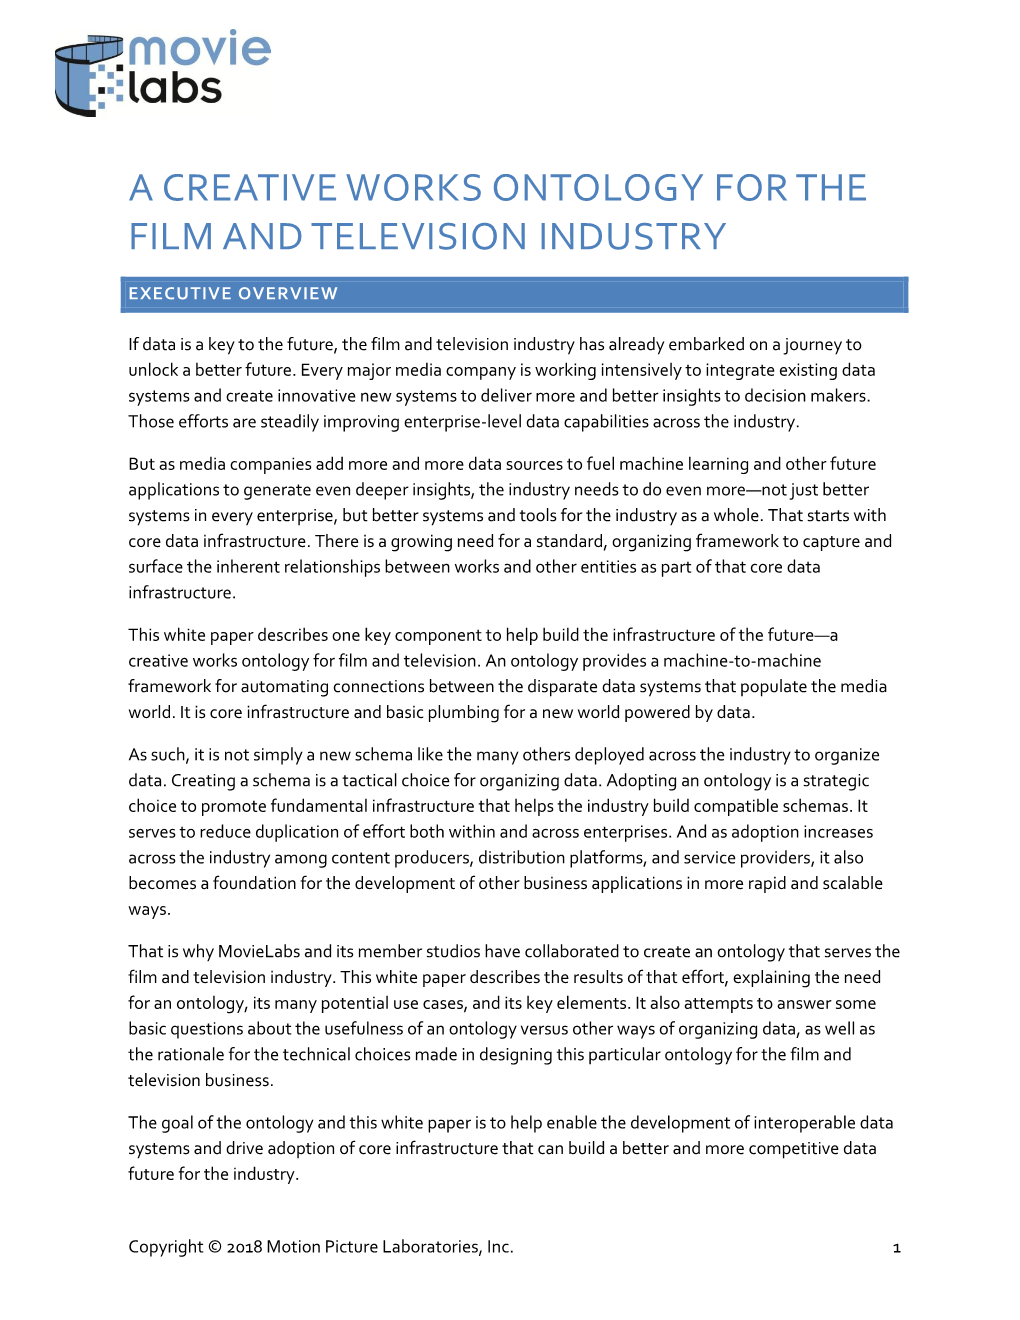 A Creative Works Ontology for the Film and Television Industry